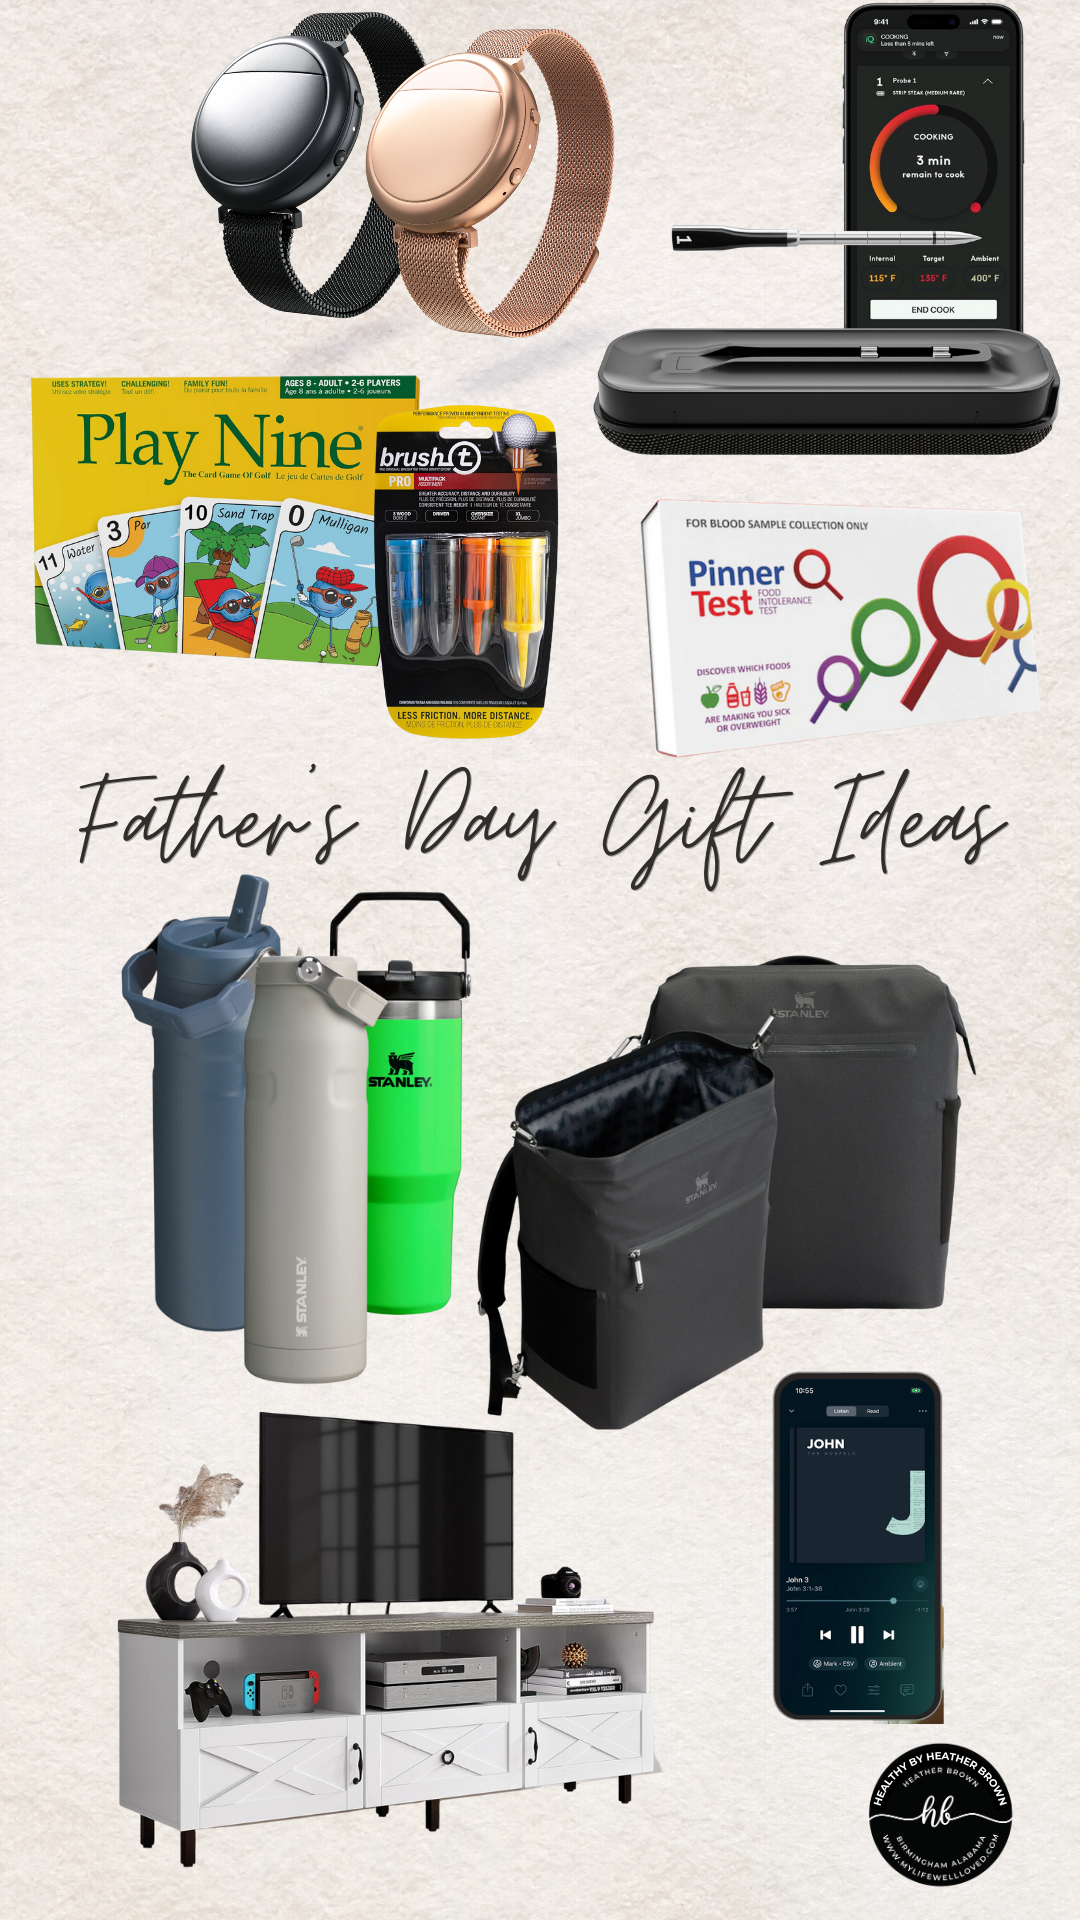 Christian Birmingham podcaster & health coach, Heather Brown, shares her best unique father's day gift ideas